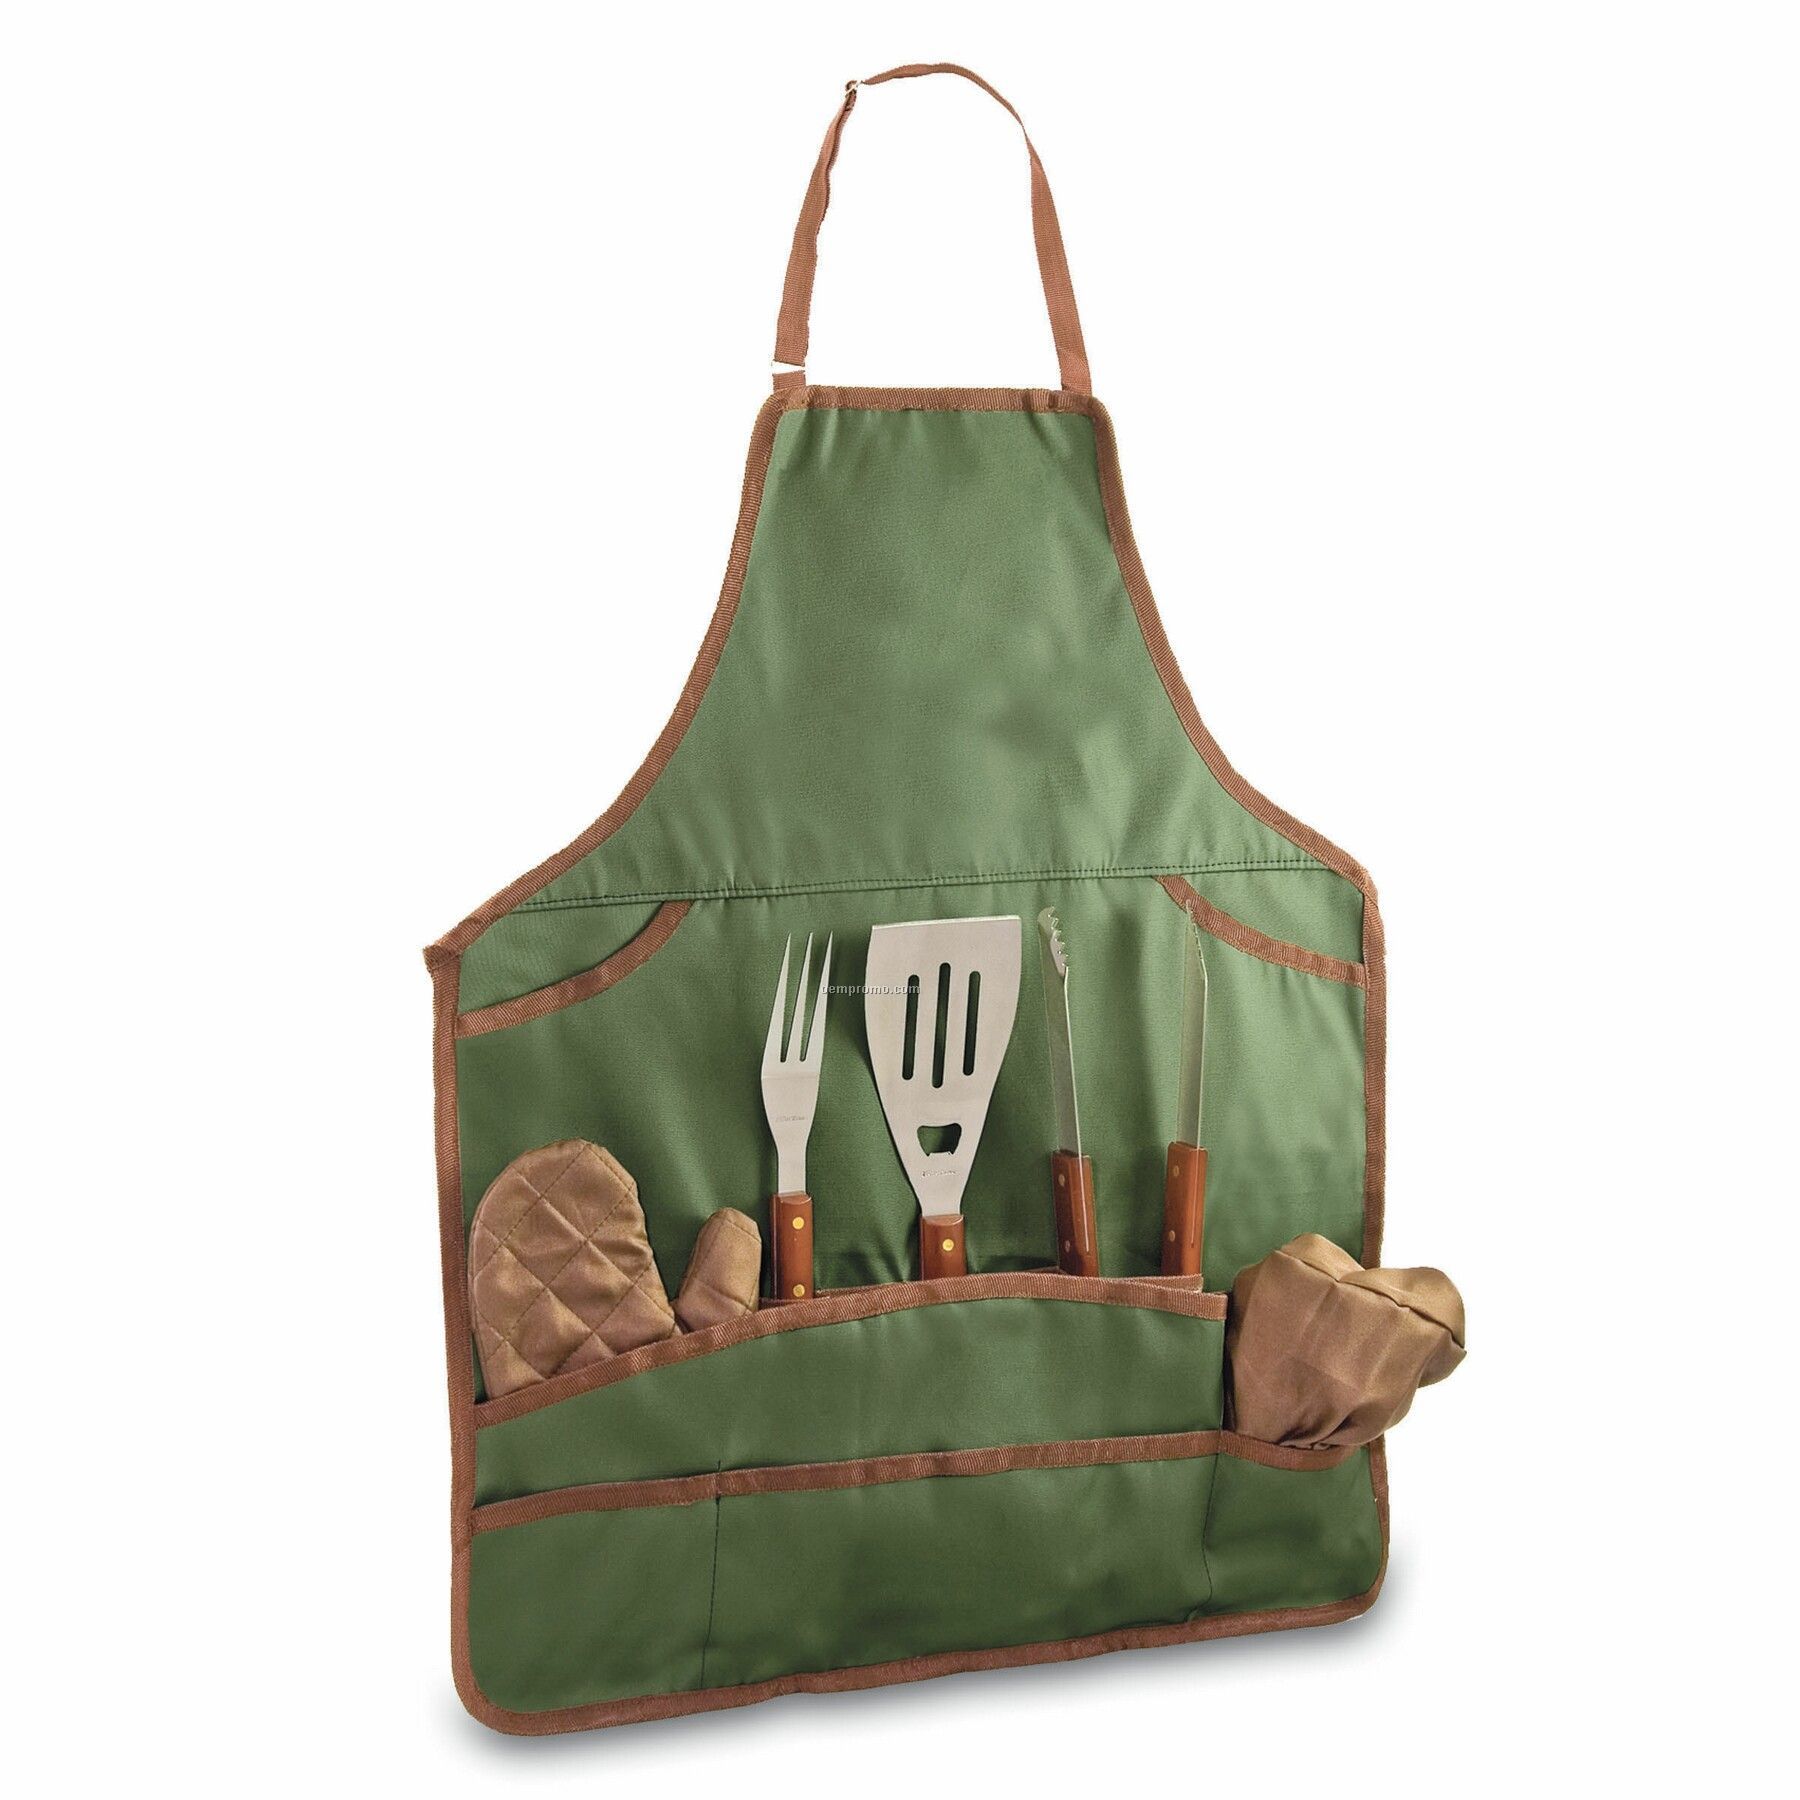 Bbq Apron Tote & Chef Hat W/ 3 Piece Stainless Steel Tool Set